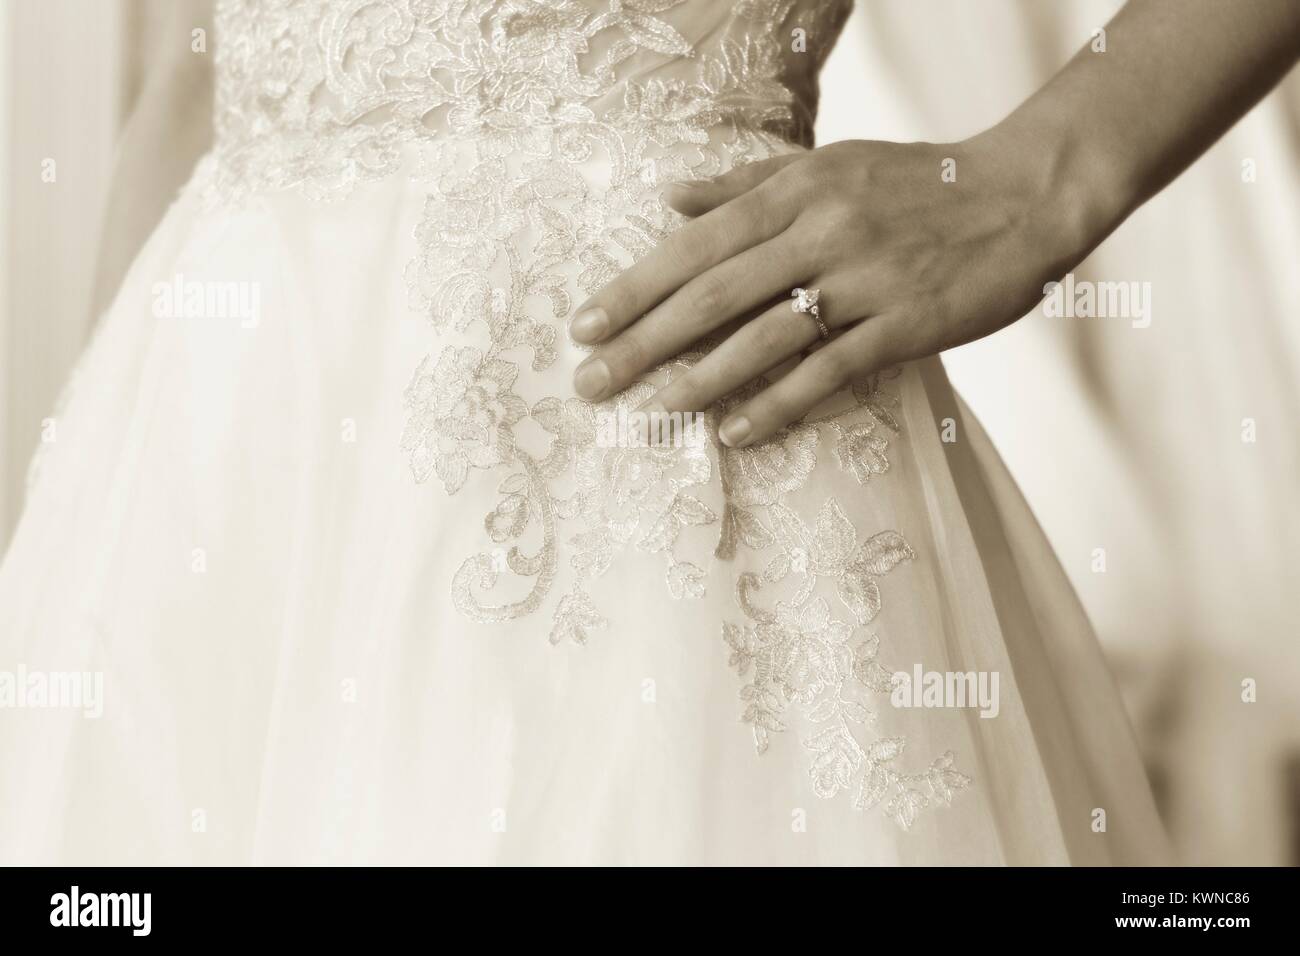 Engagement ring closeup with bridal gown Stock Photo